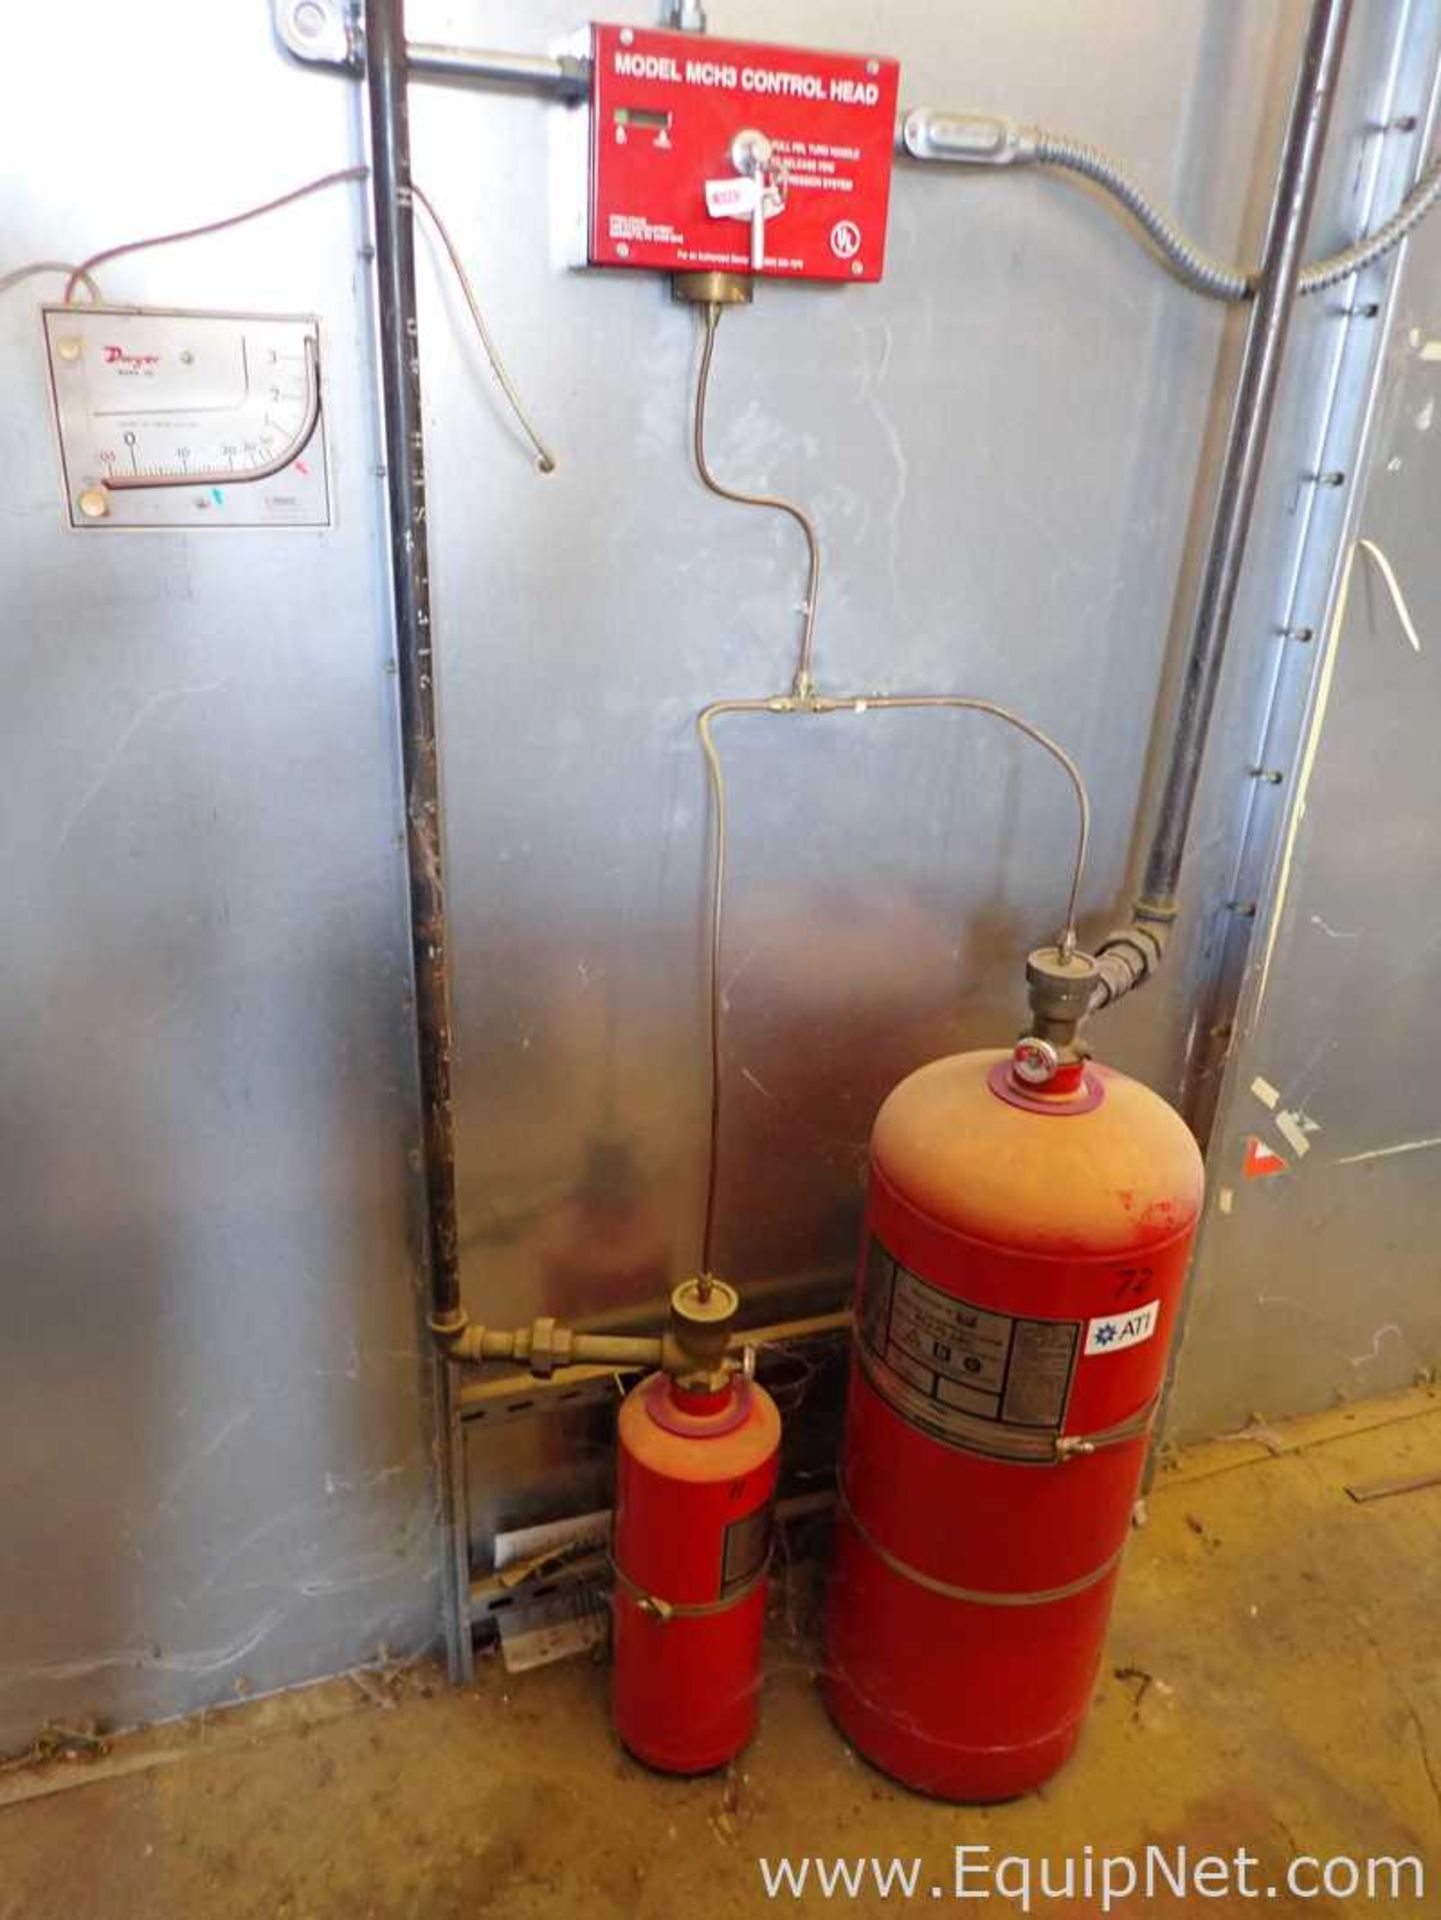 Lot of 2 Fire Extinguishers